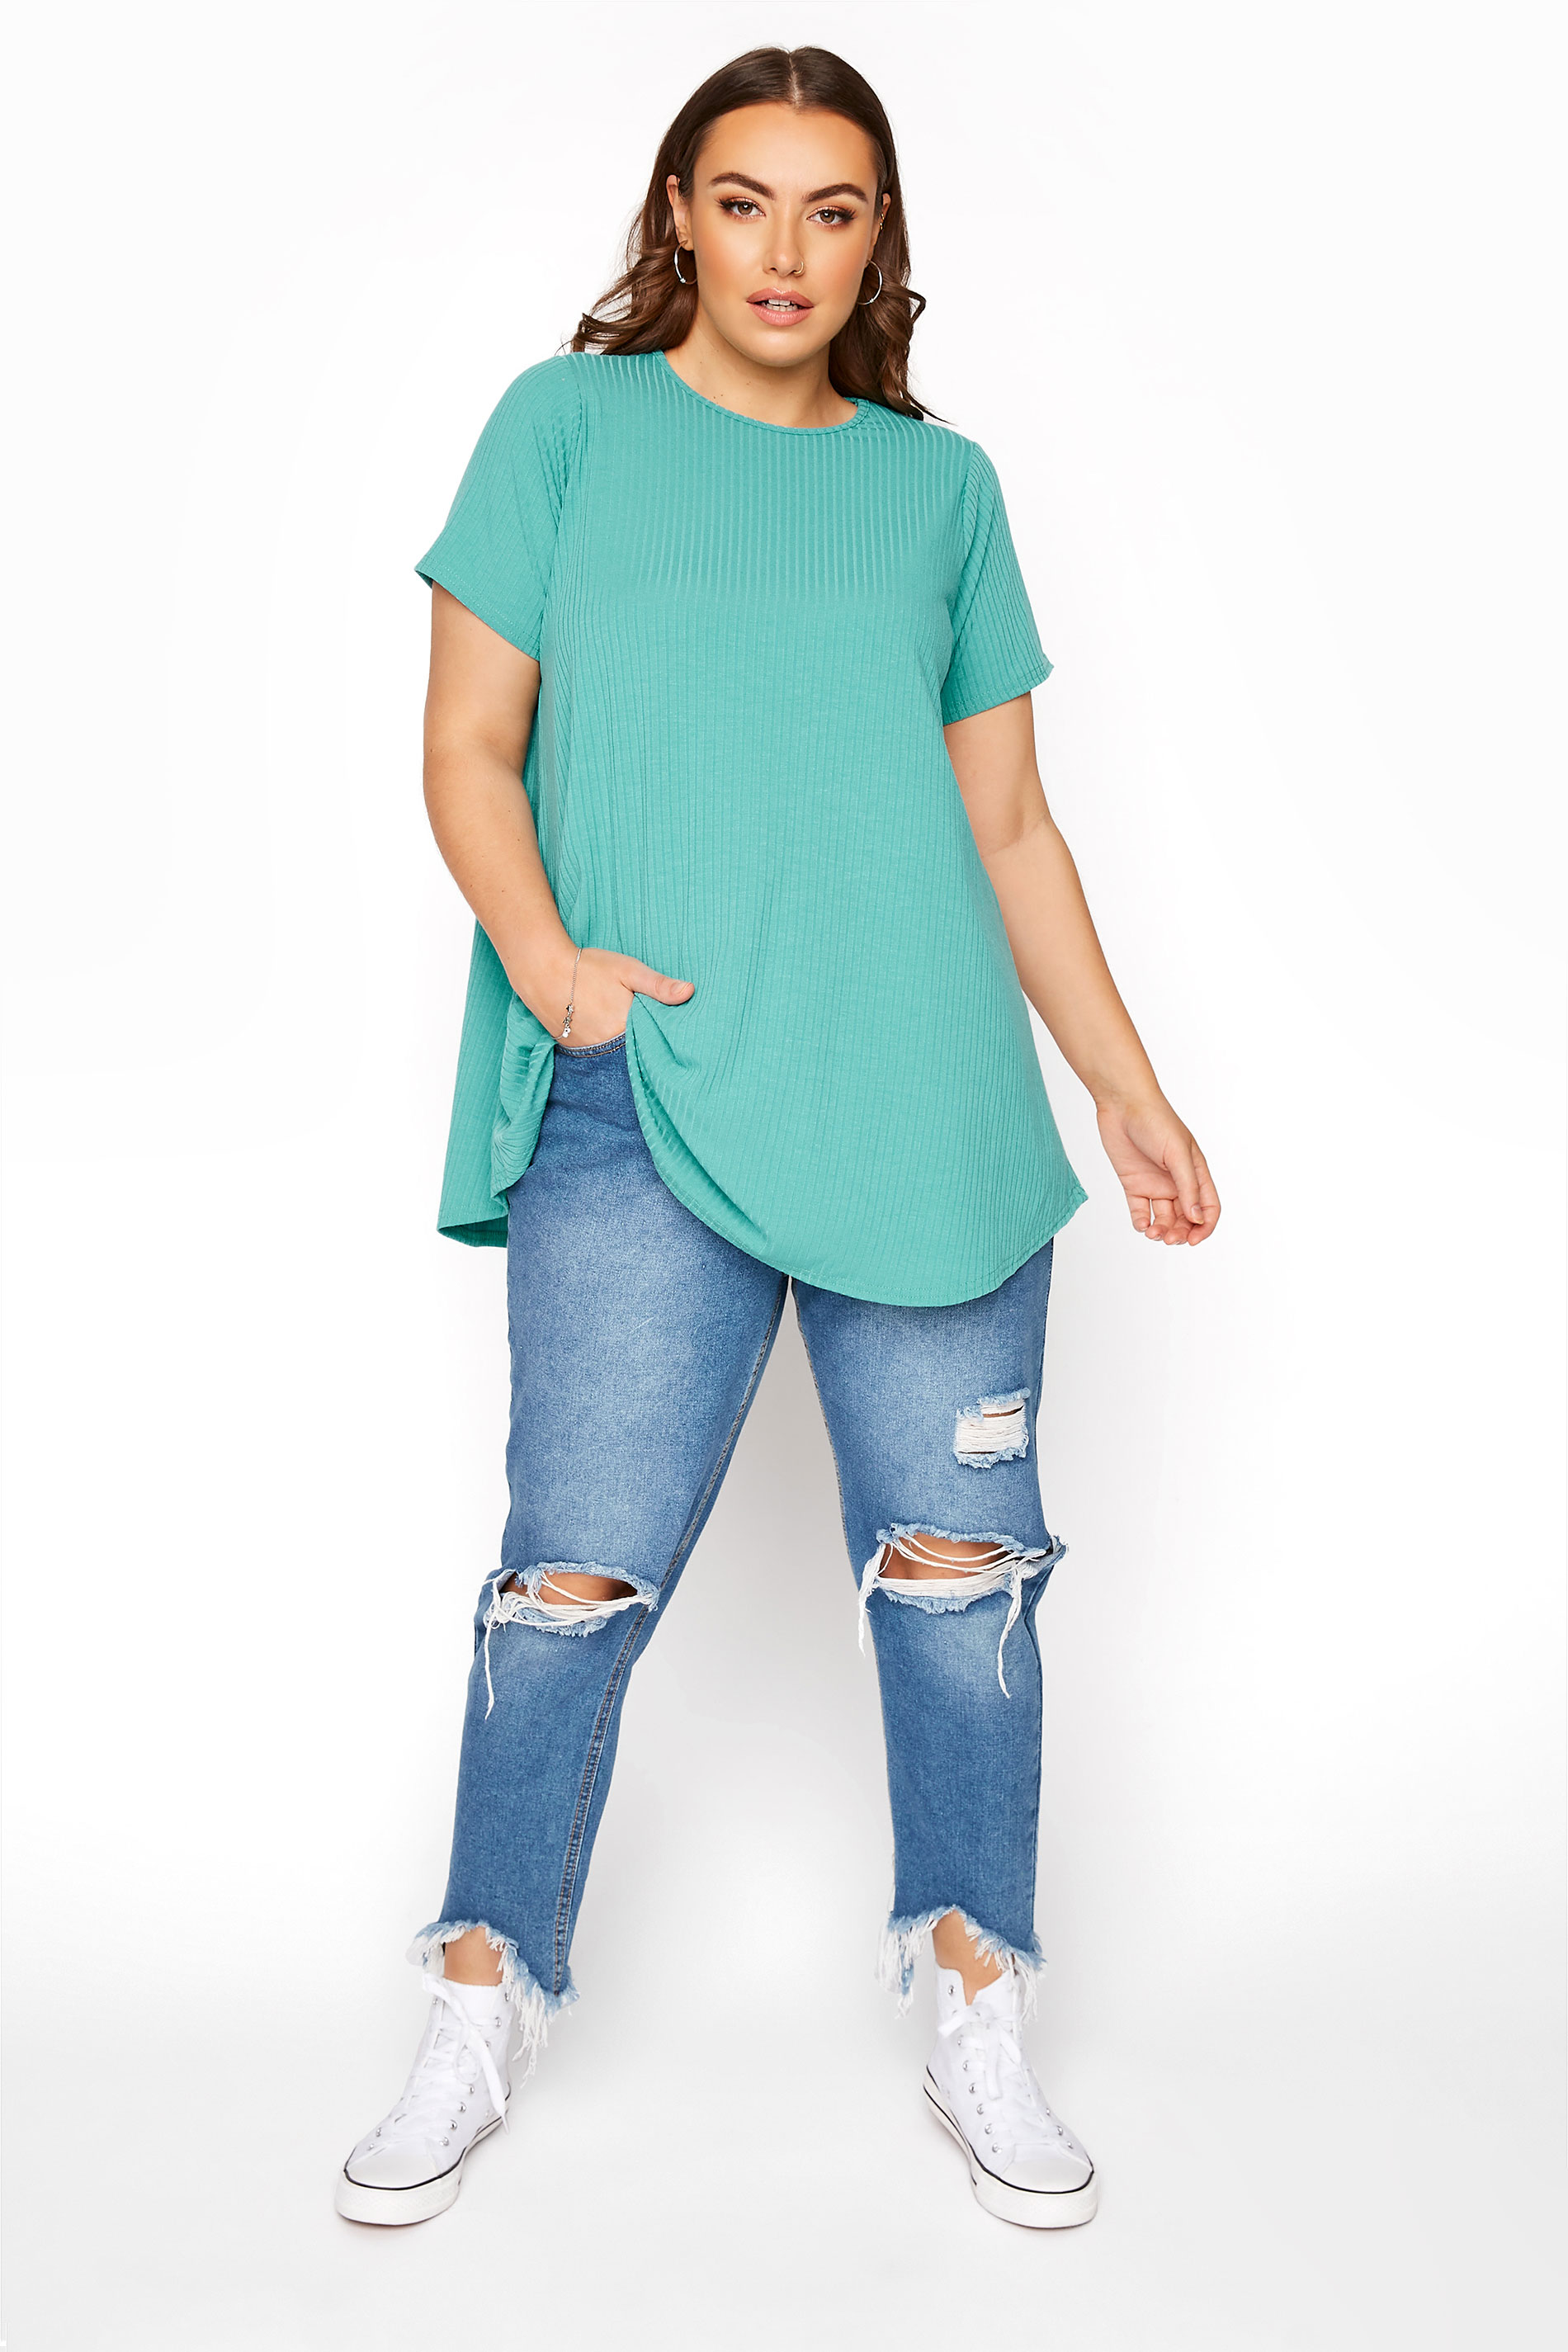 Grande taille  Tops Grande taille  Tops Jersey | LIMITED COLLECTION - T-Shirt Vert Nervuré en Jersey - VF51181